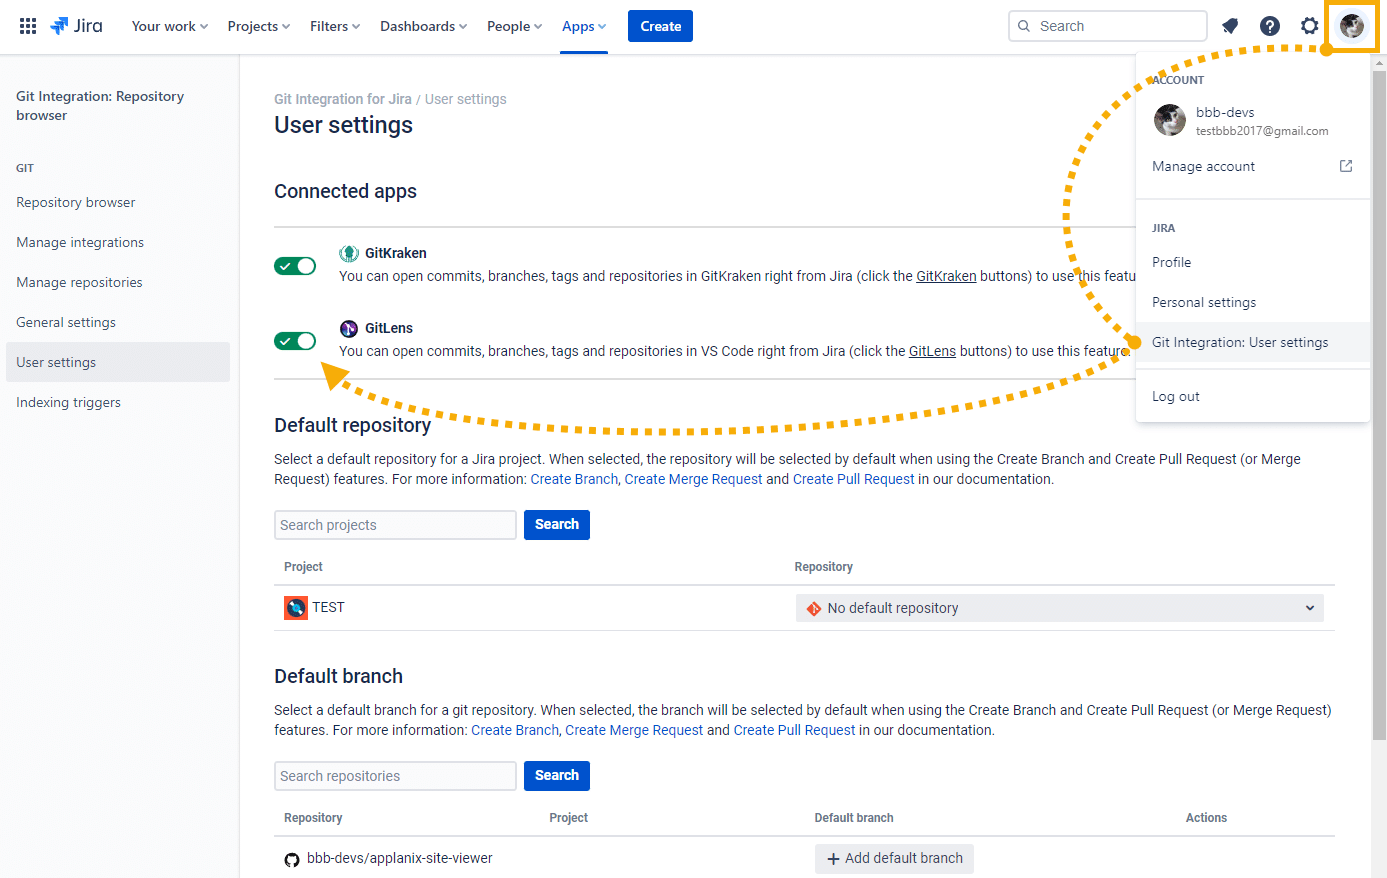 Access the GitLens integration option to enable/disable the feature in the User settings (sidebar) of the Git Integration for Jira app